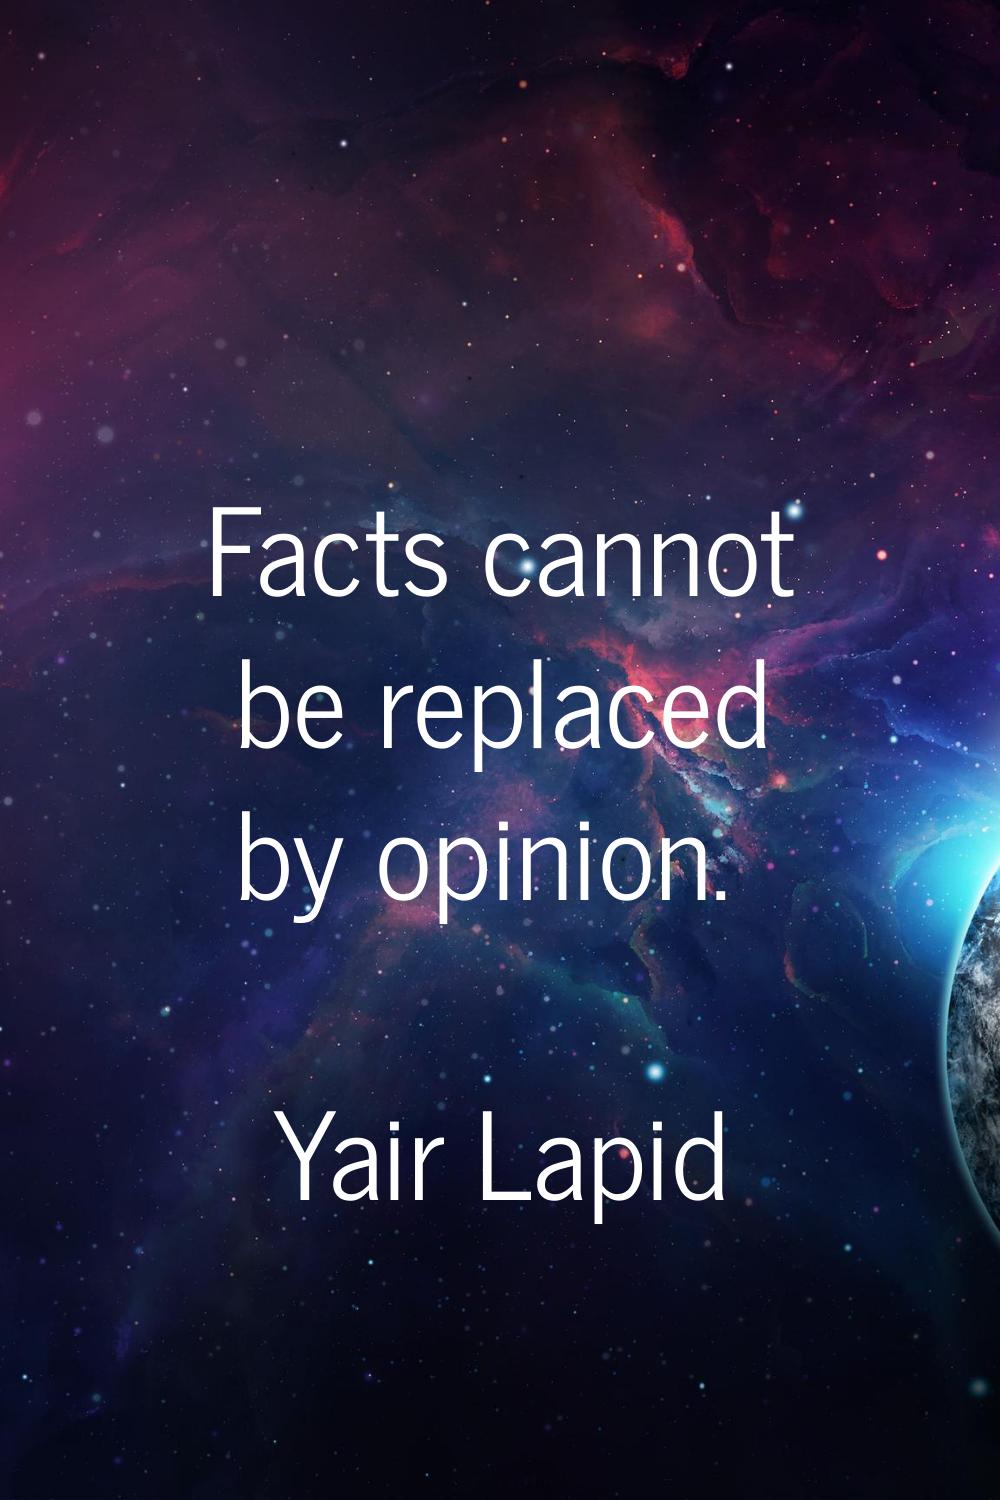 Facts cannot be replaced by opinion.